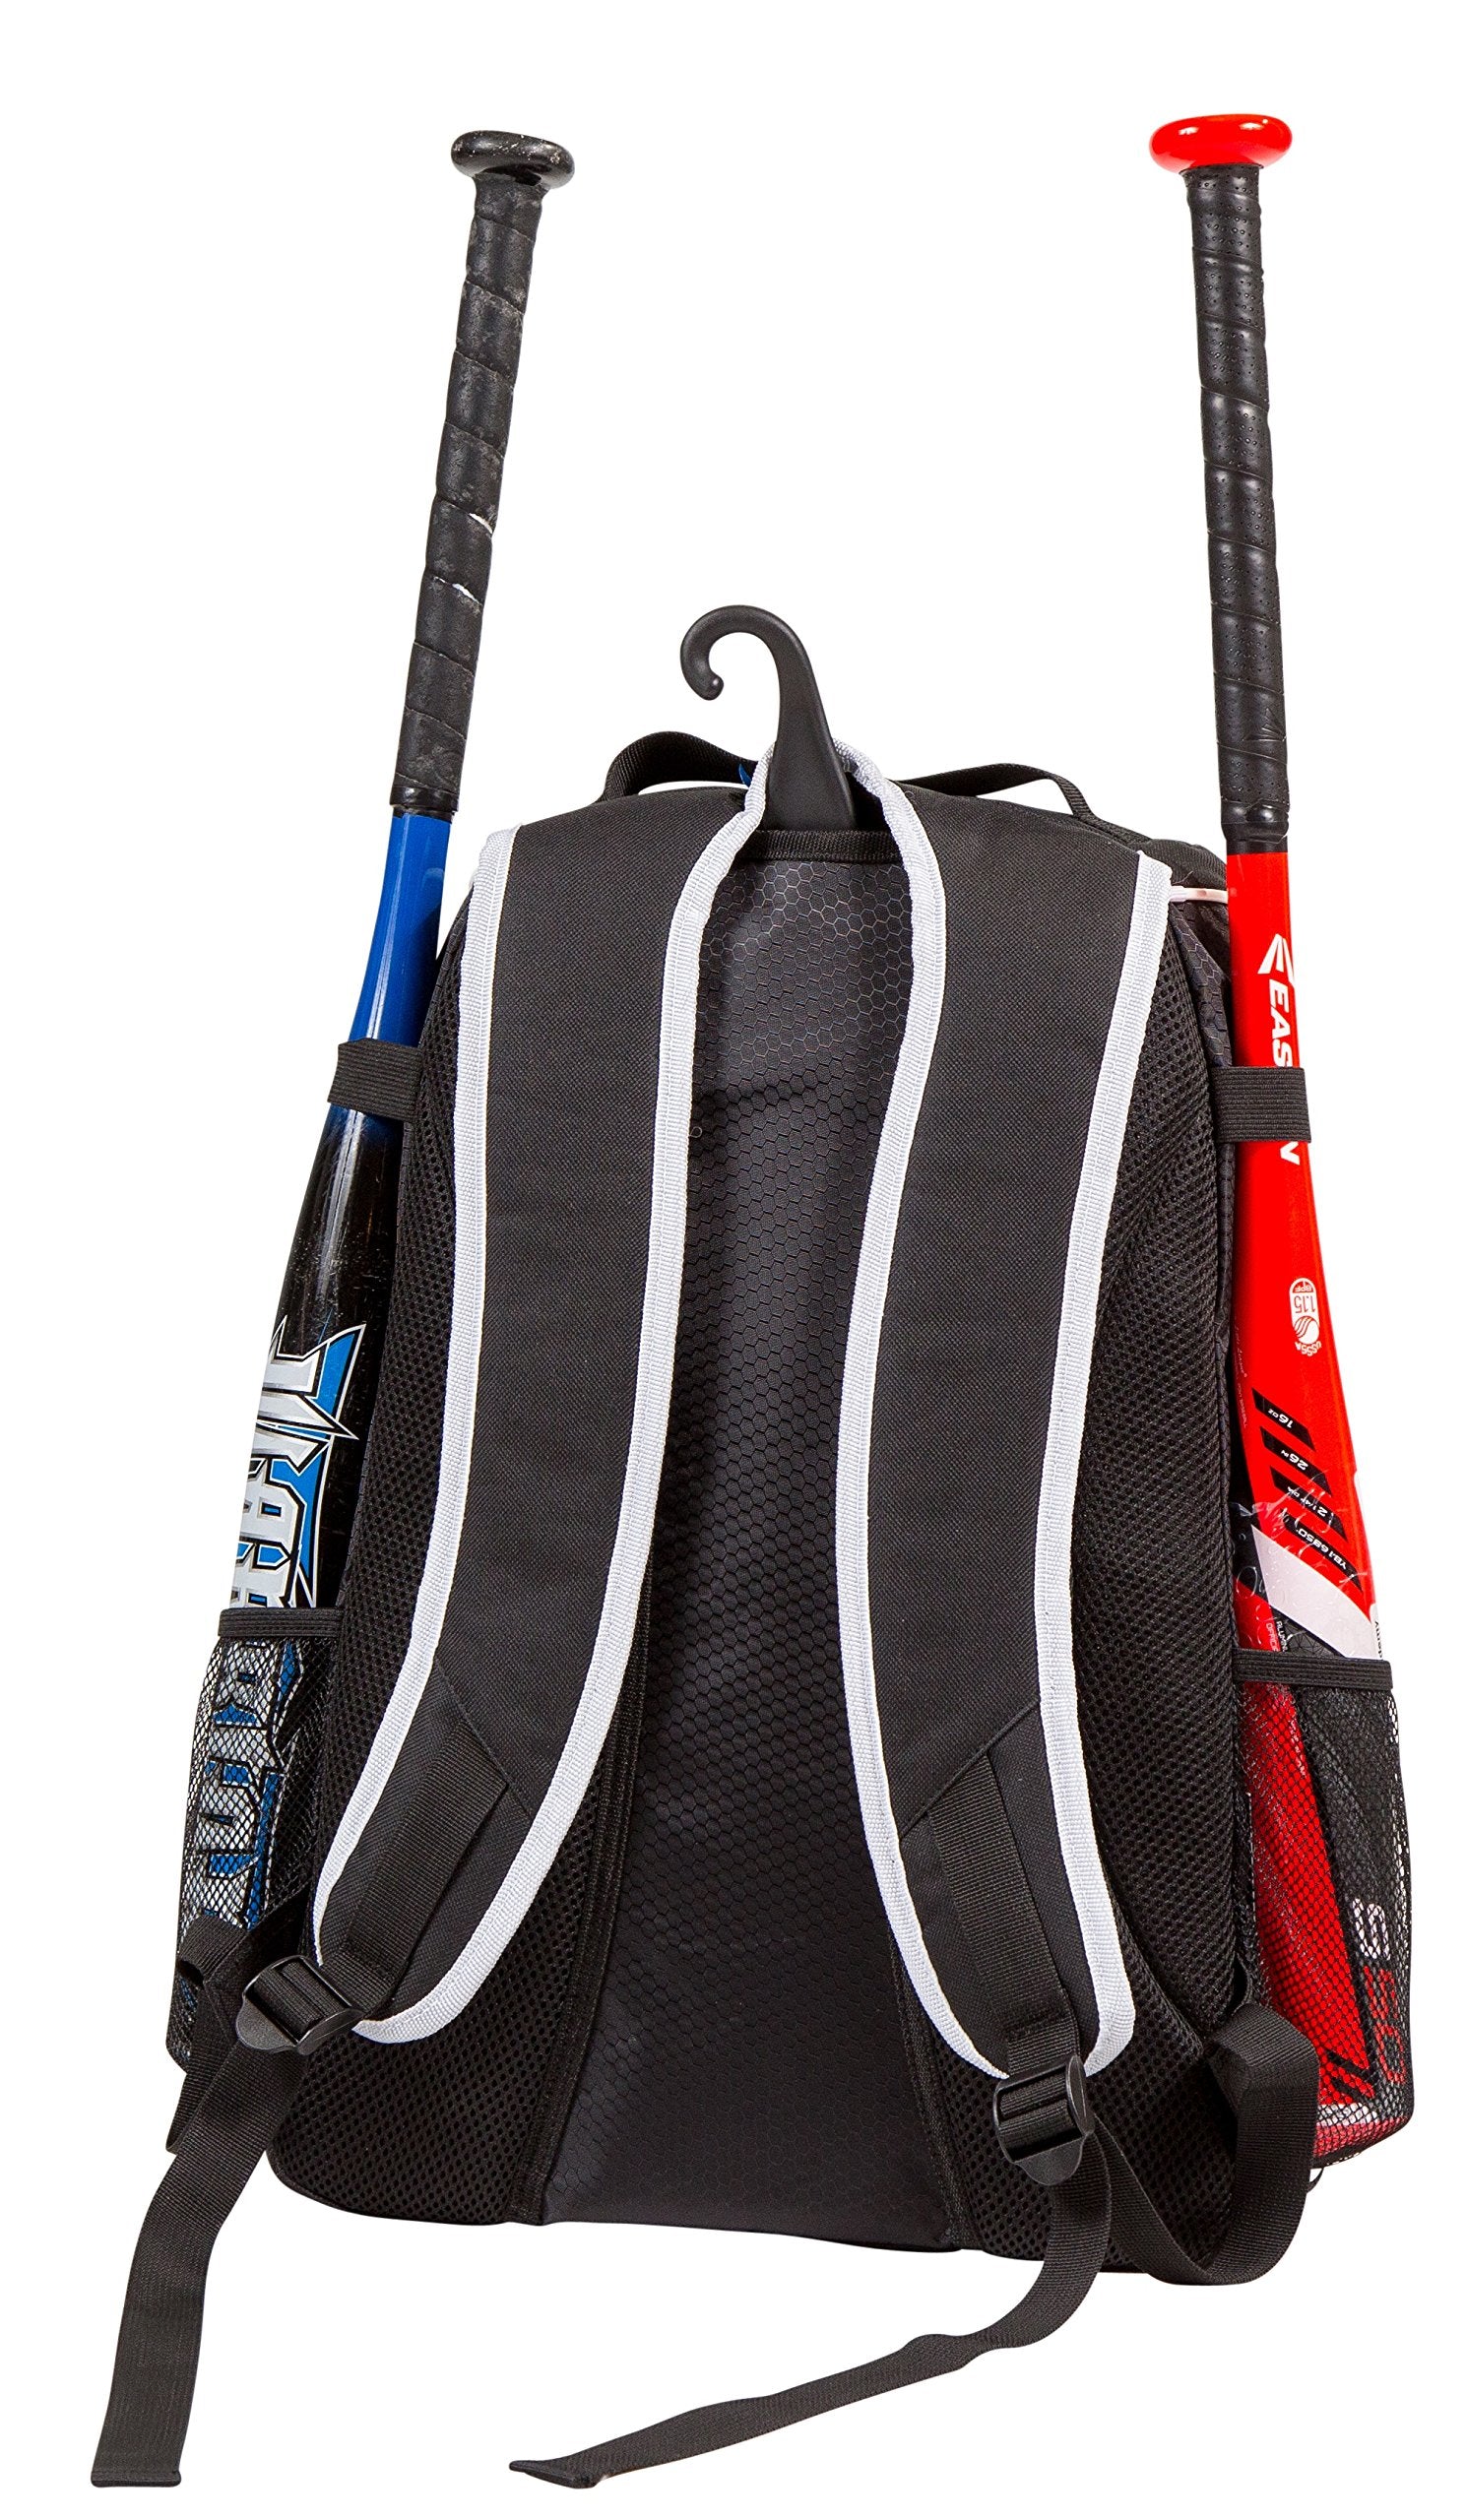 Athletico Baseball Bat Bag - Backpack for Baseball, T-Ball & Softball Equipment & Gear for Youth and Adults | Holds Bat, Helmet, Glove, & Shoes |Shoe Compartment & Fence Hook  - Very Good